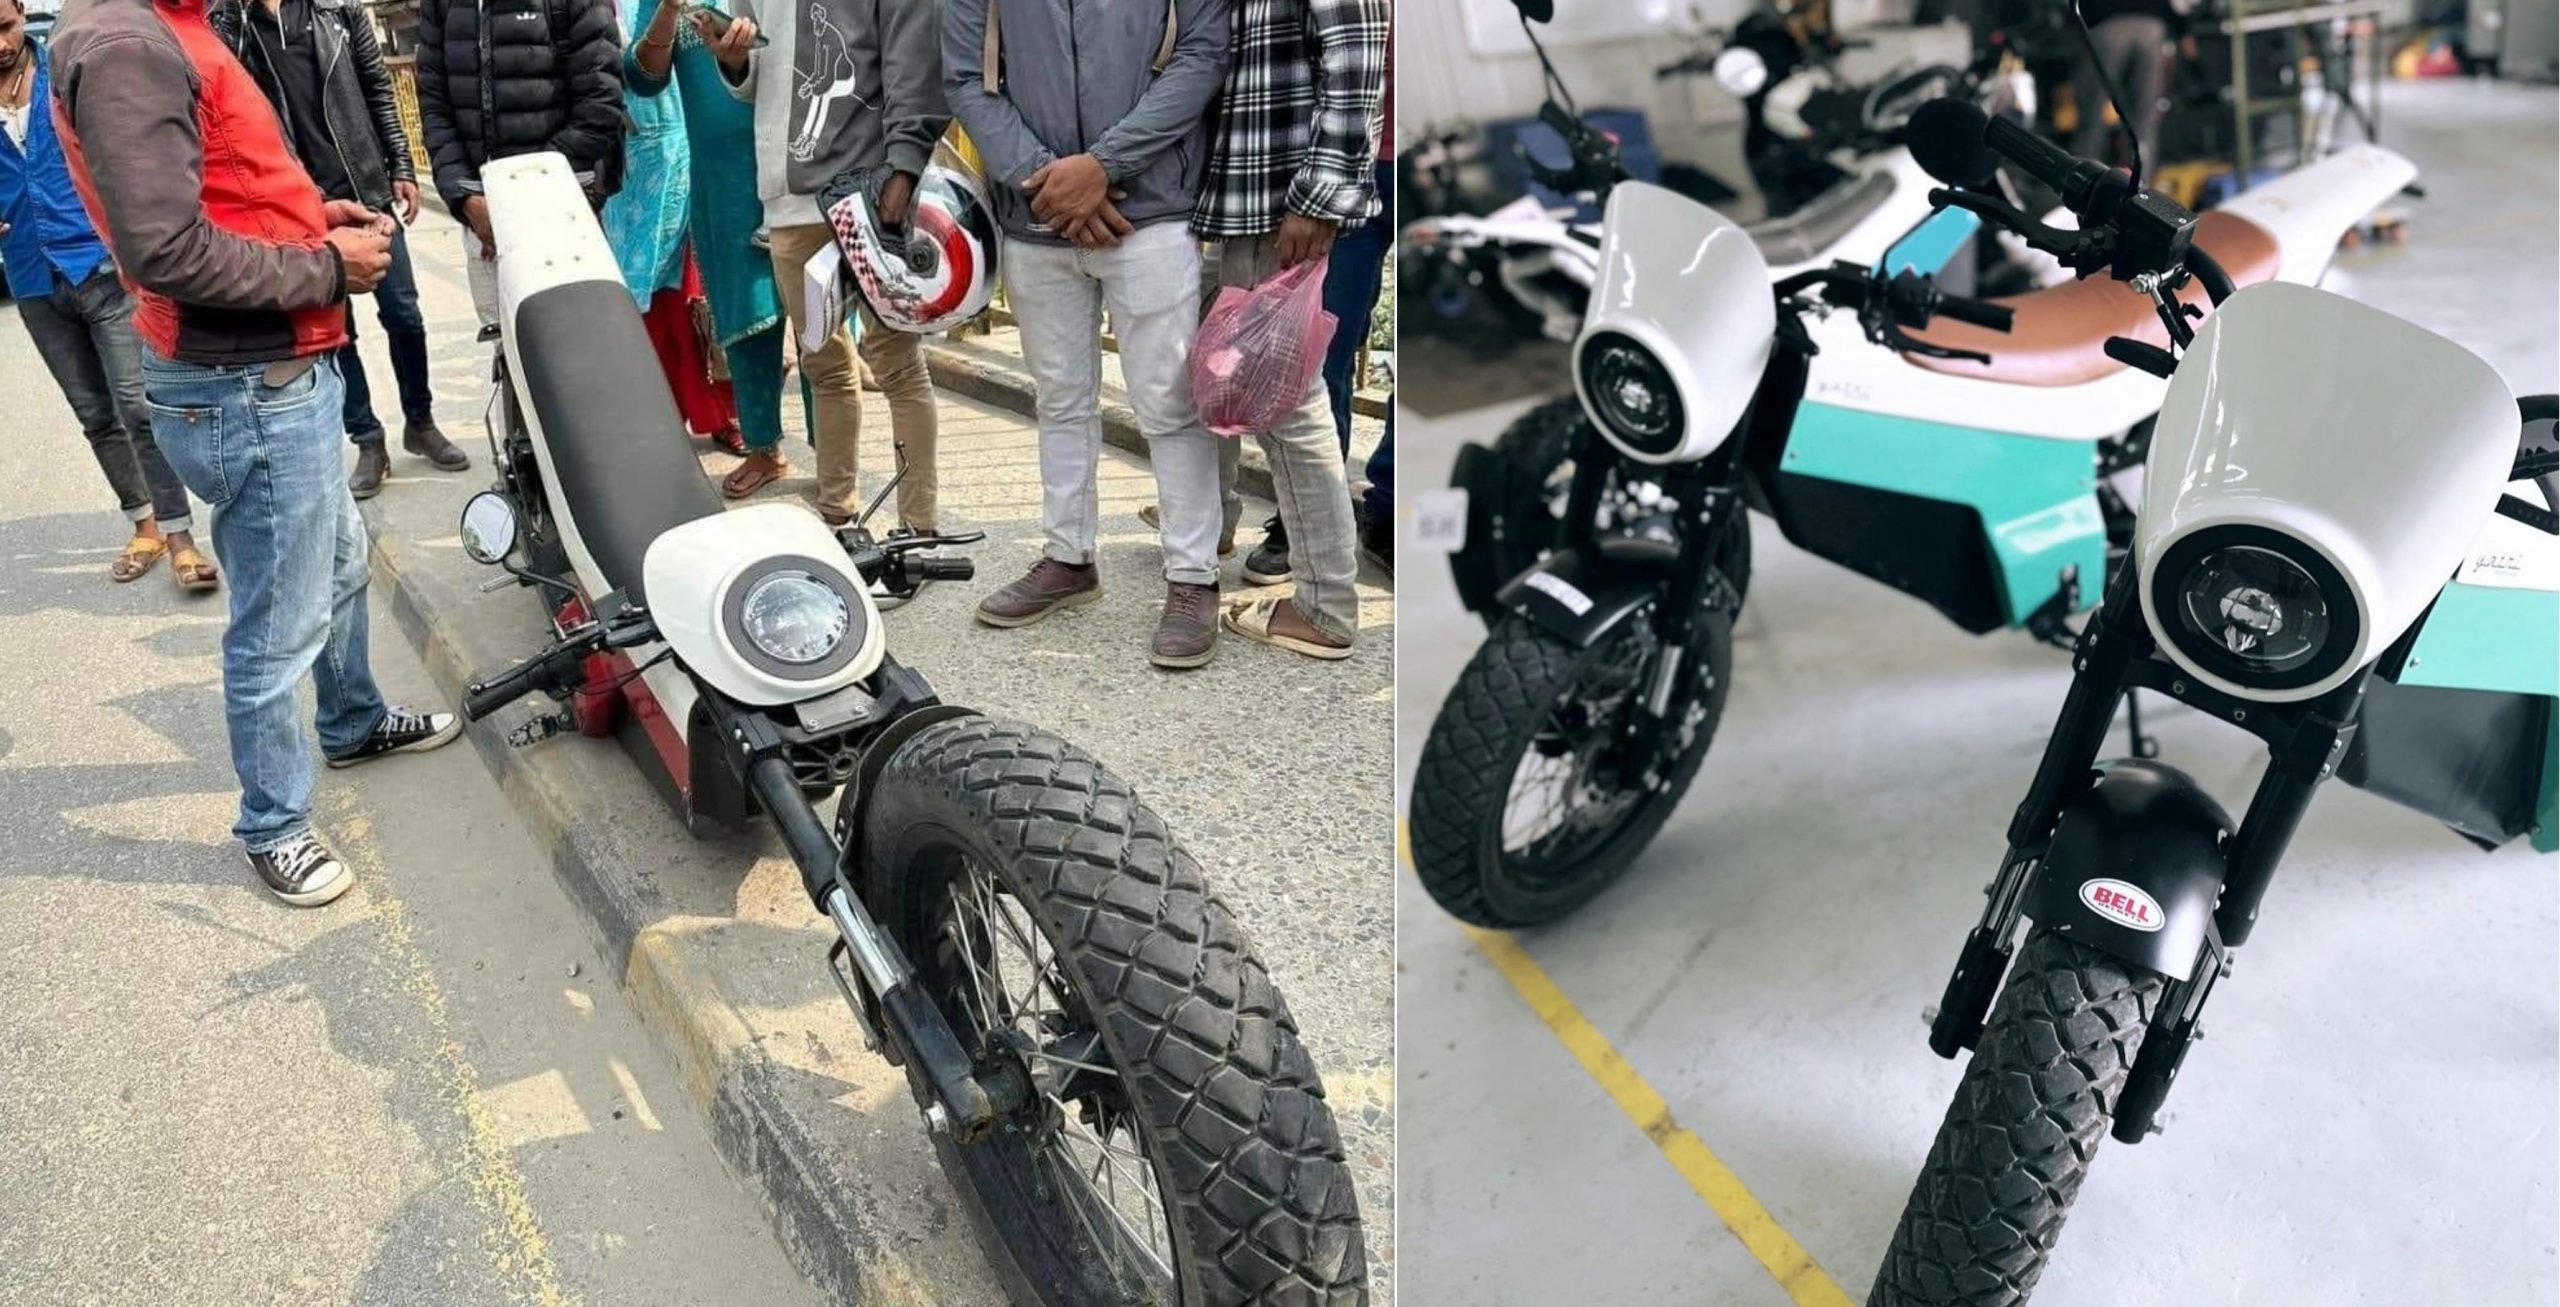 Company issued an explanation for the viral ‘Yatri’ bike photo